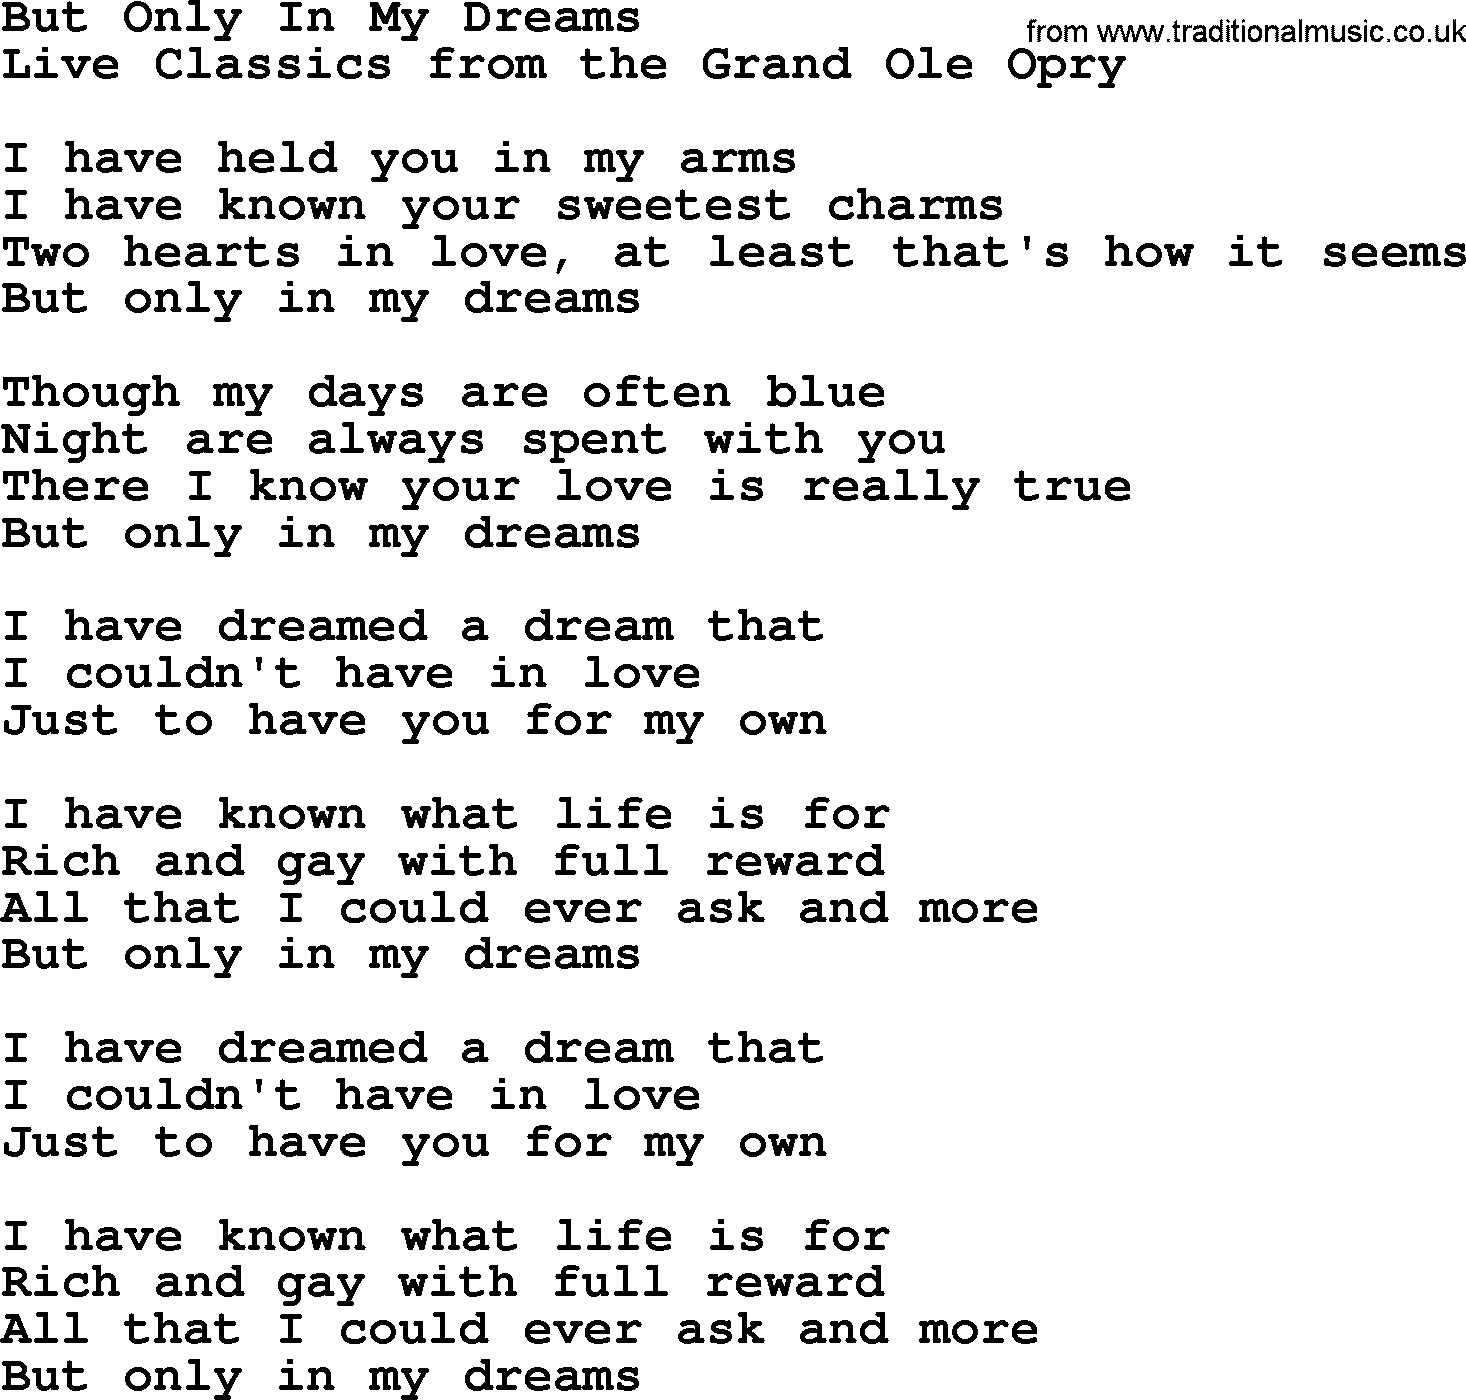 Marty Robbins song: But Only In My Dreams, lyrics